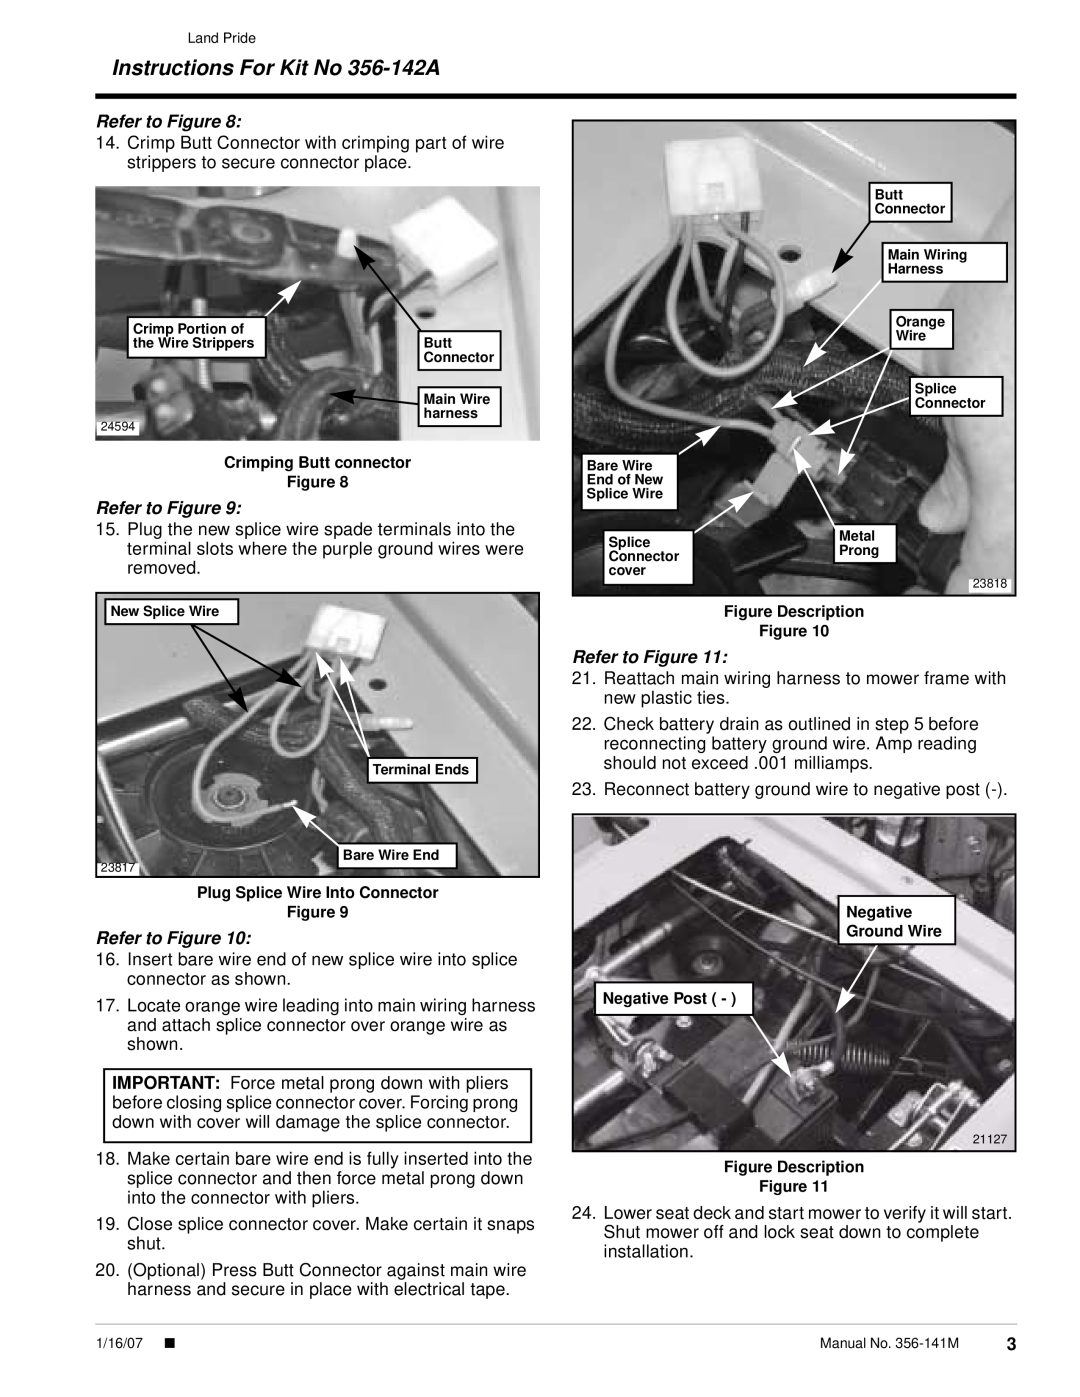 Land Pride manual Instructions For Kit No 356-142A, Refer to Figure 